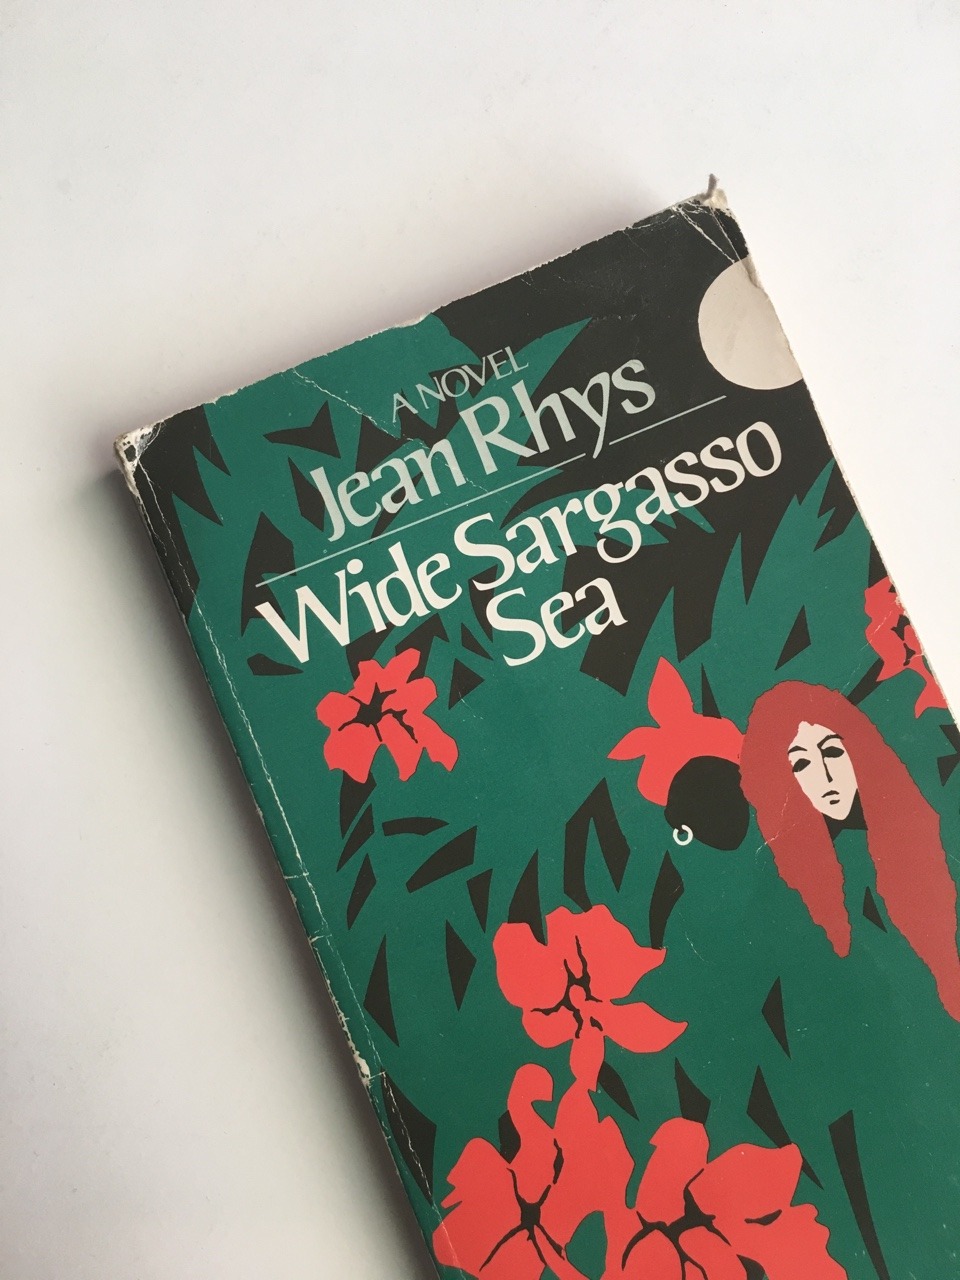 Lost And Immerses s Wide Sargasso Sea